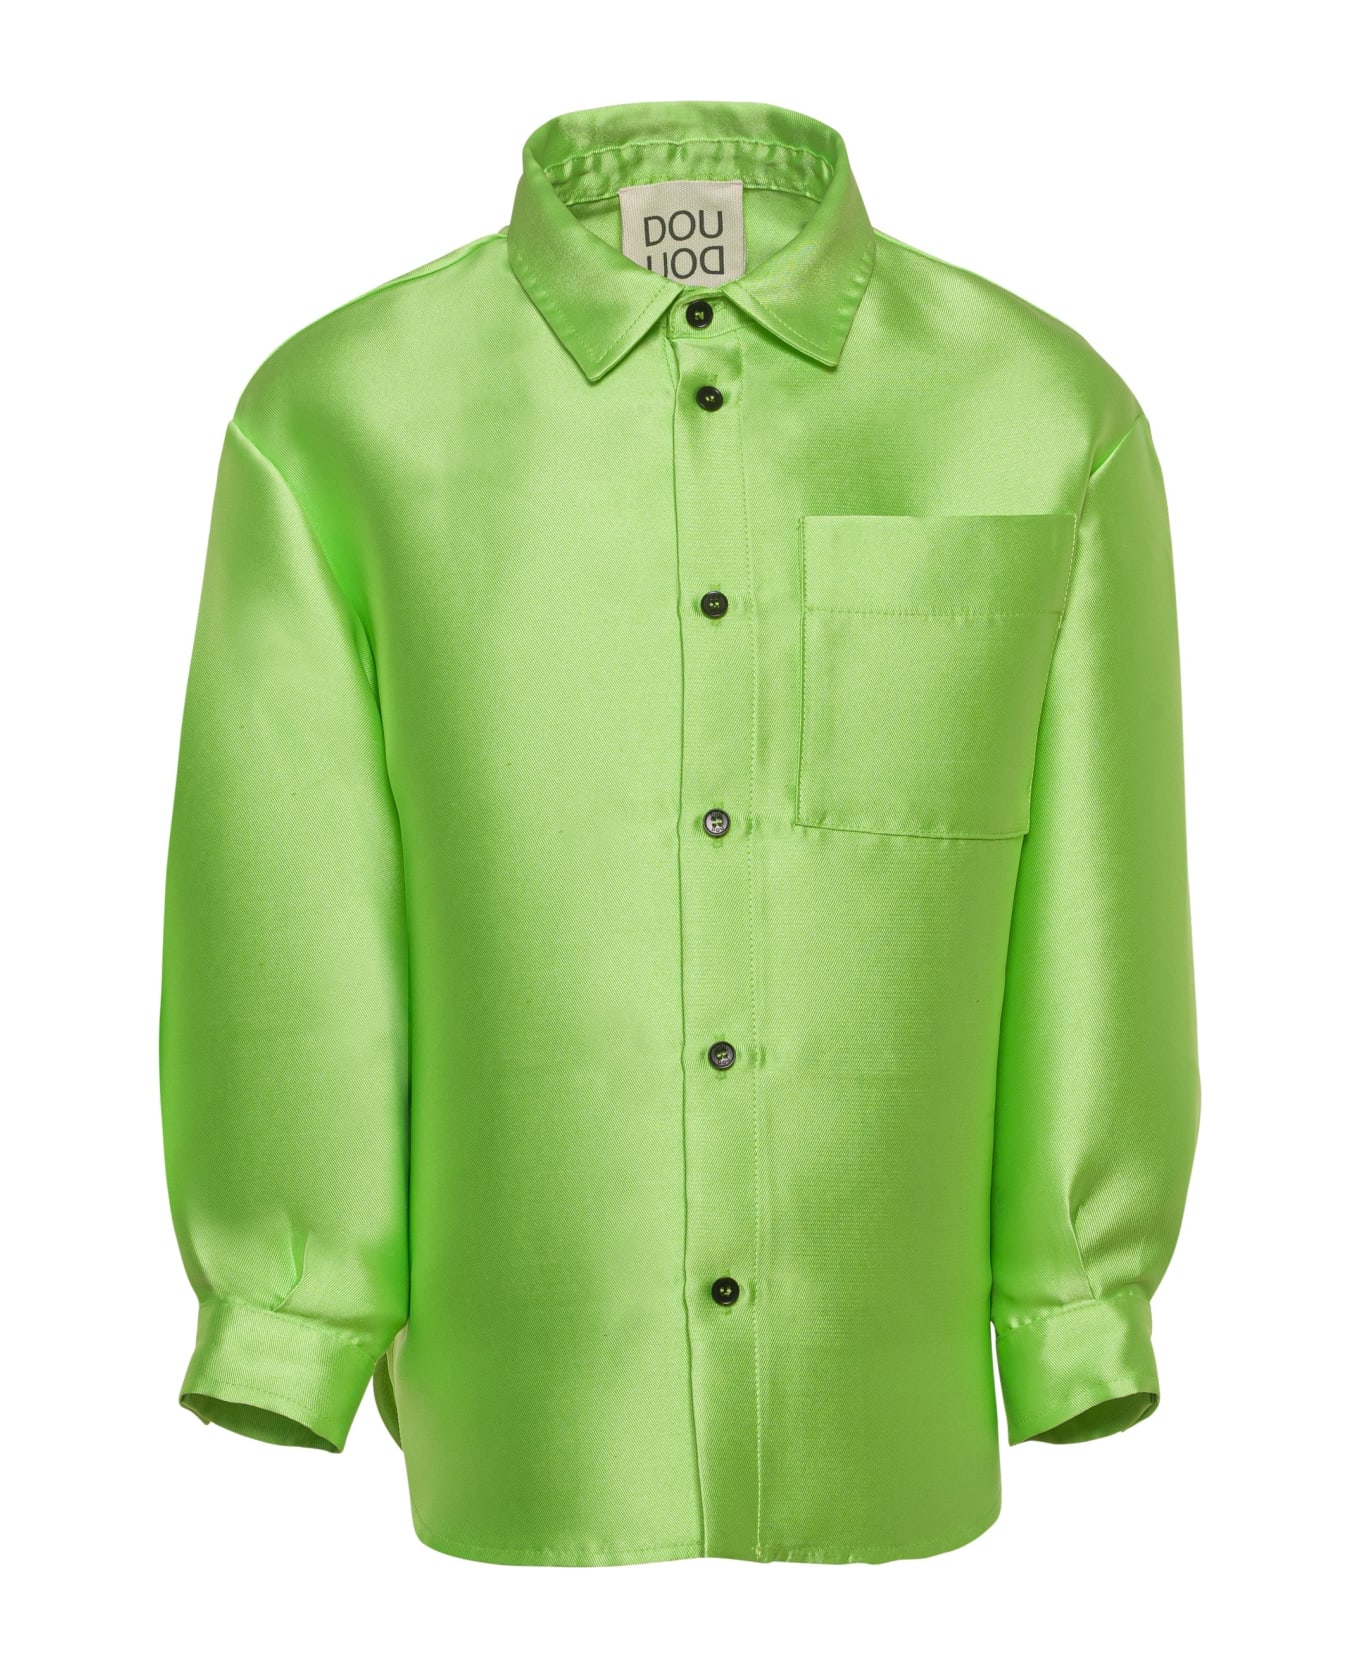 Douuod Shirt With Satin Effect - Green シャツ